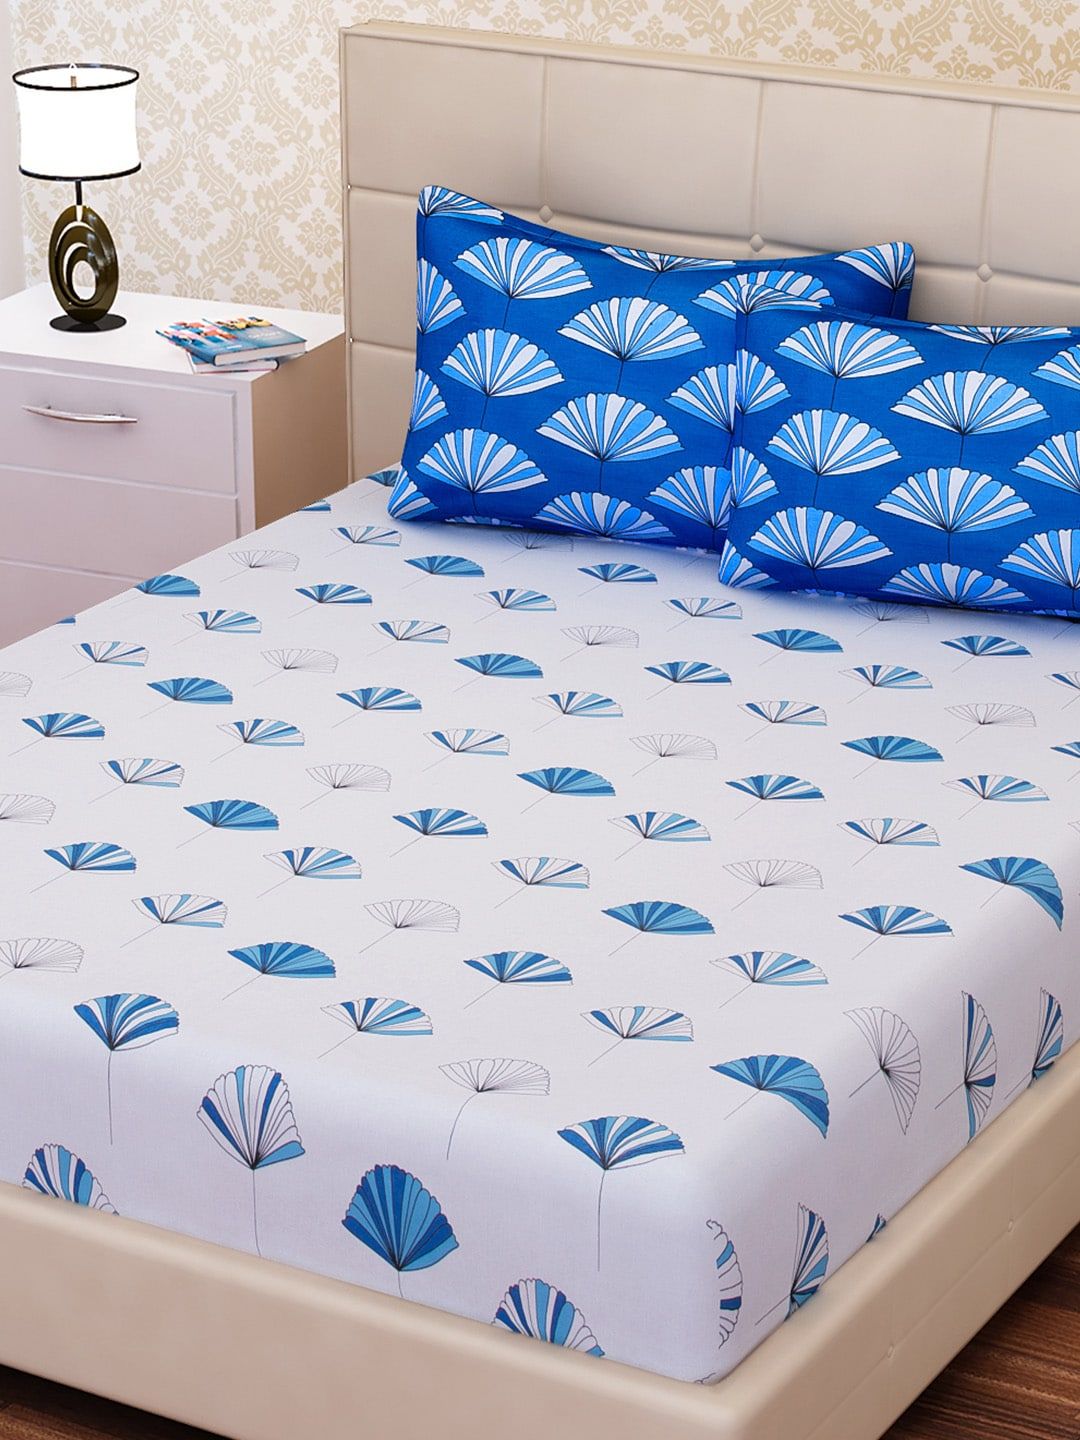 SEJ by Nisha Gupta White & Blue 144 TC Cotton King Bedsheet with 2 Pillow Covers Price in India